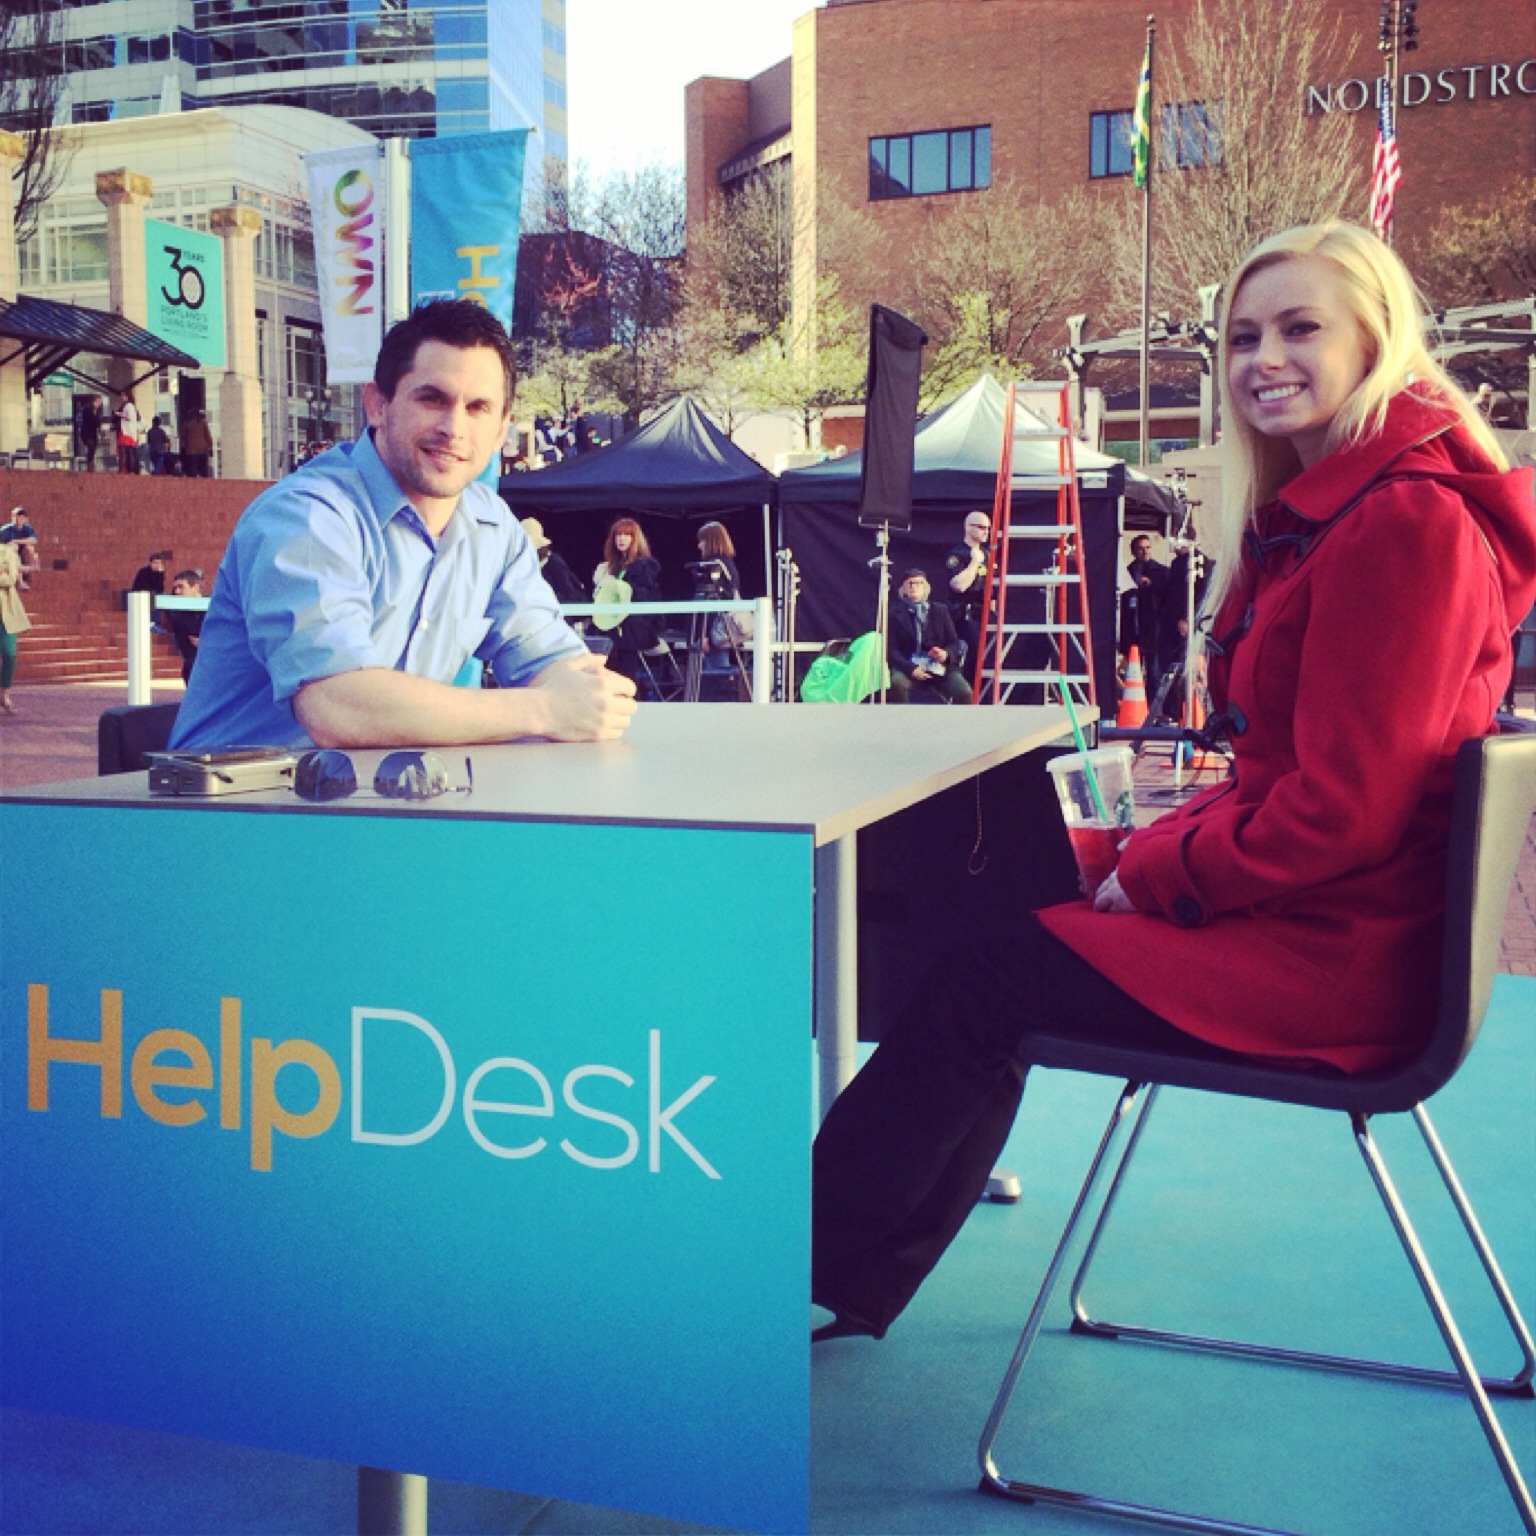 Oprah Winfrey - The Help Desk. Stand-In for author Cheryl Strayed & audience participant